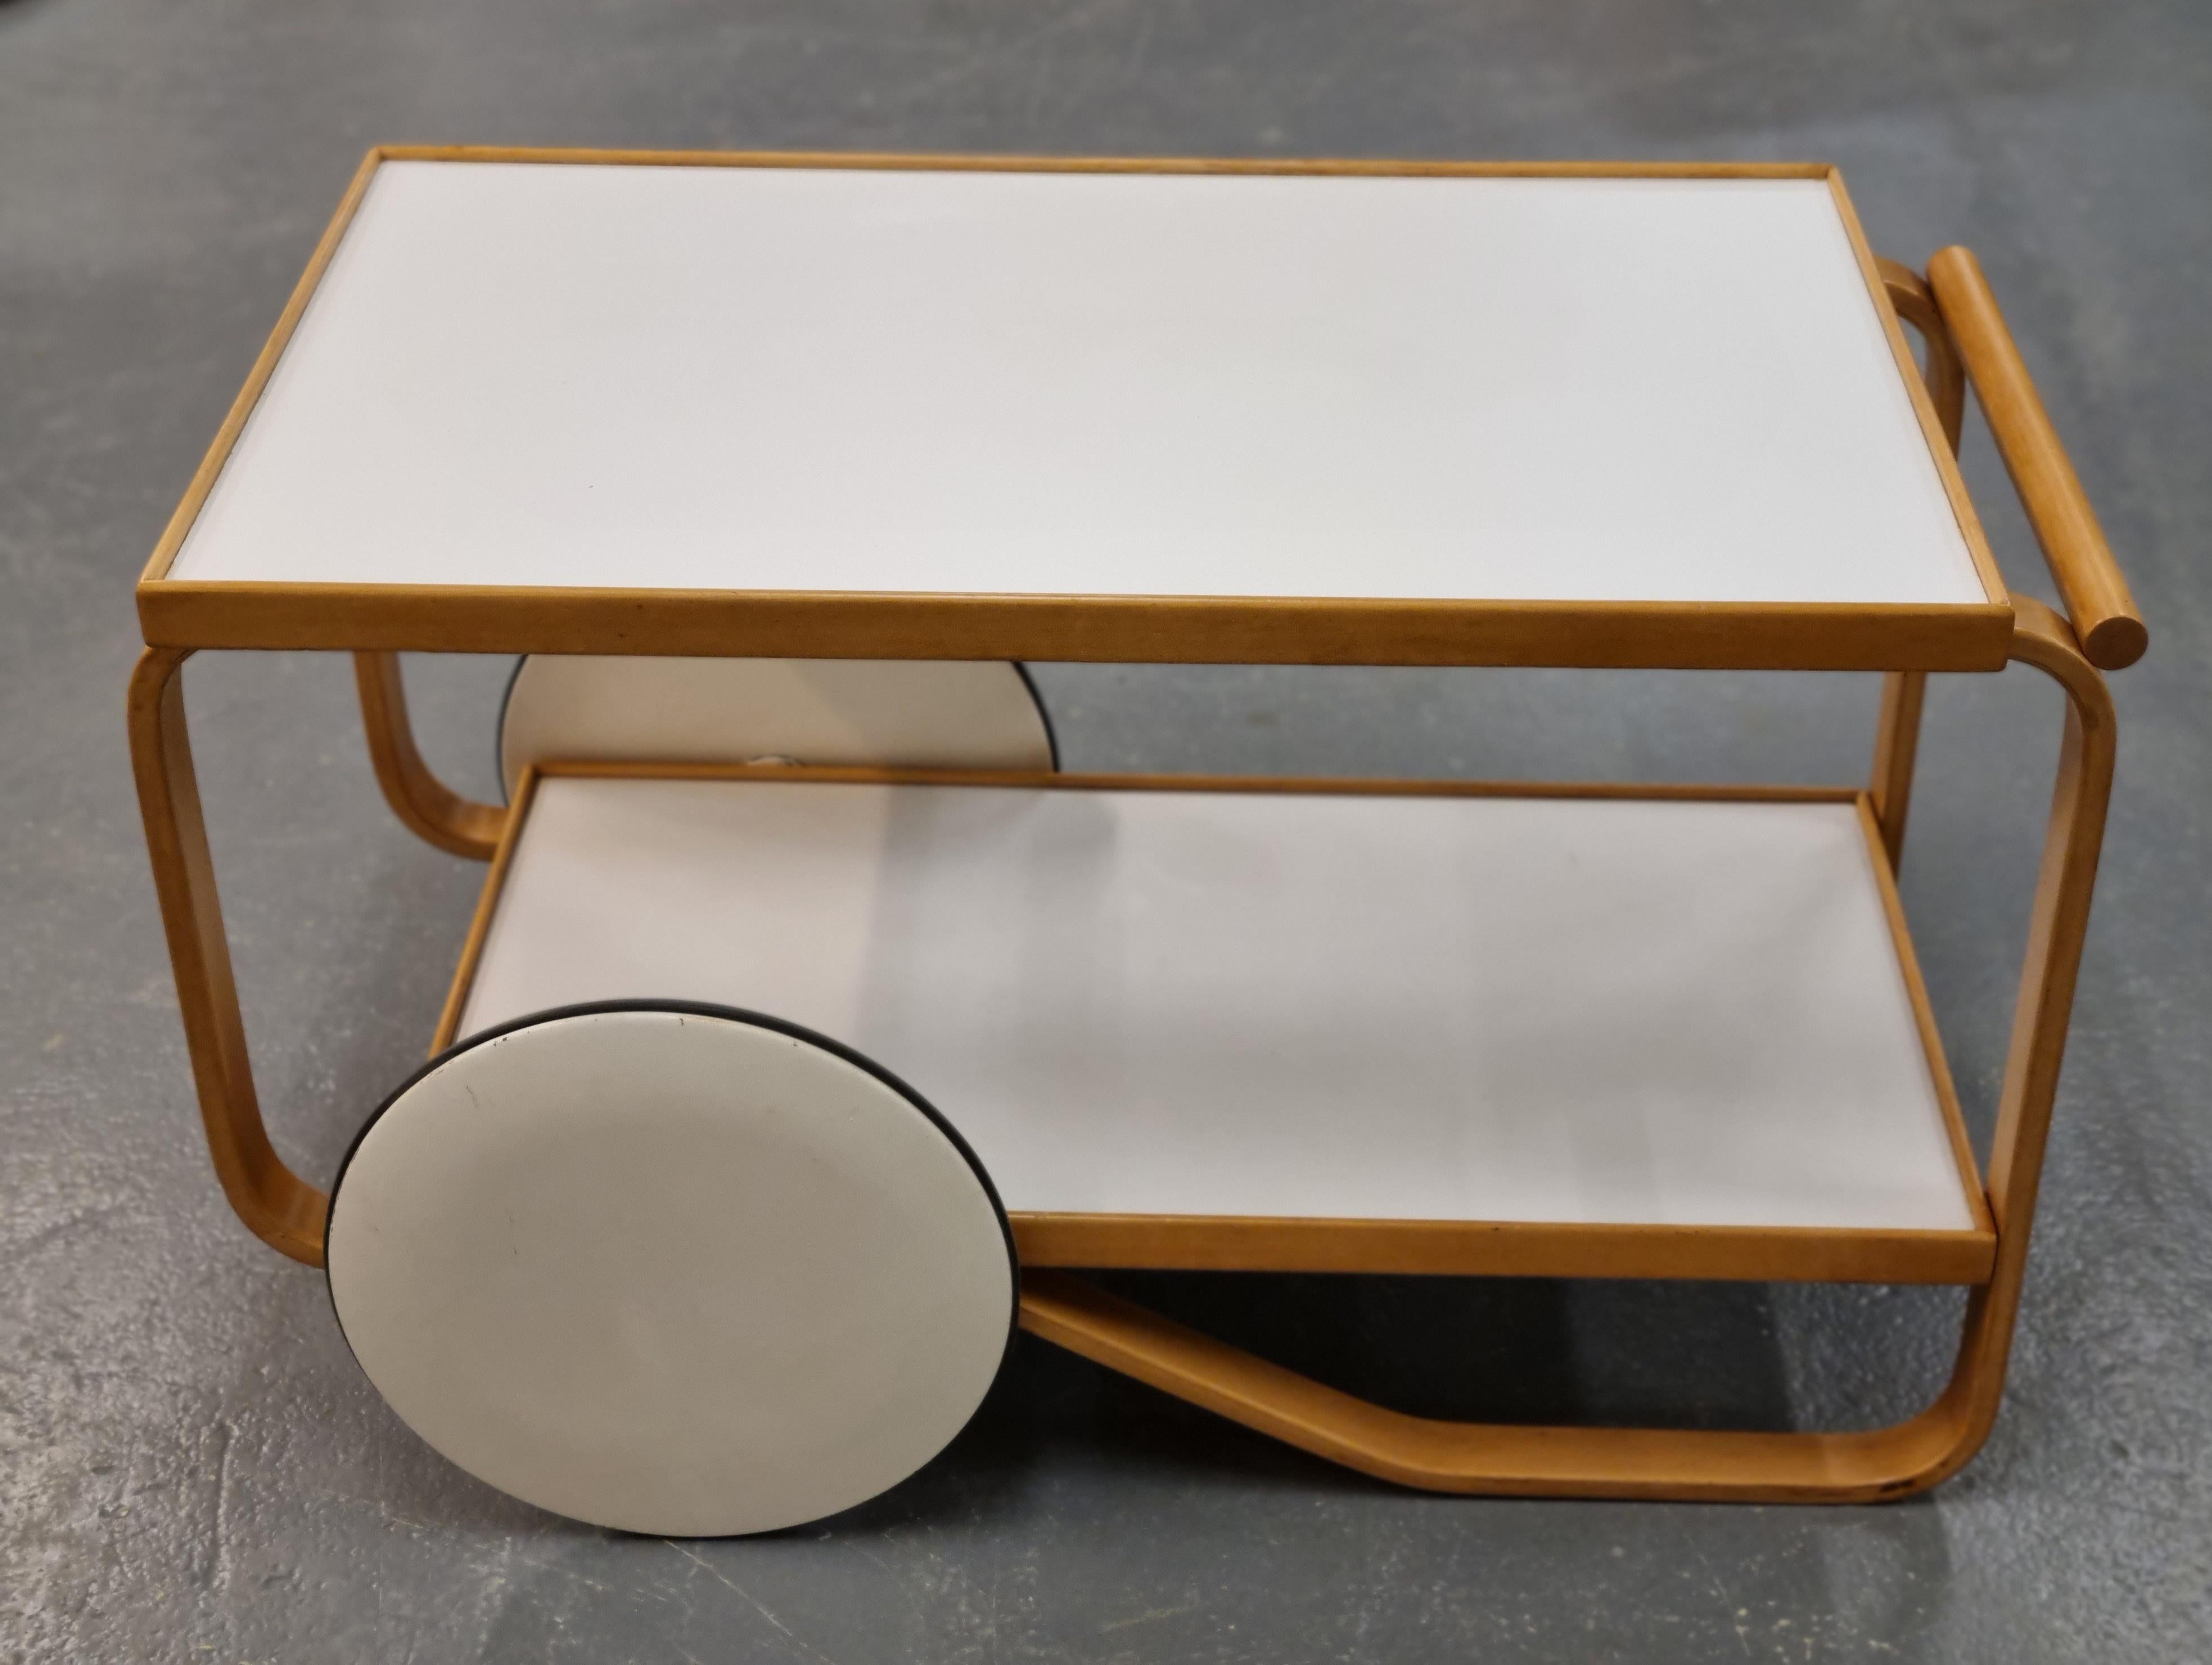 Alvar Aalto first introduced this model cart in the 1930s. It is the simplest of his cart series. Inspirations of the British tee culture as well as Japanese wood works is evident in this piece.
This simple yet elegant cart is easy to move and is of